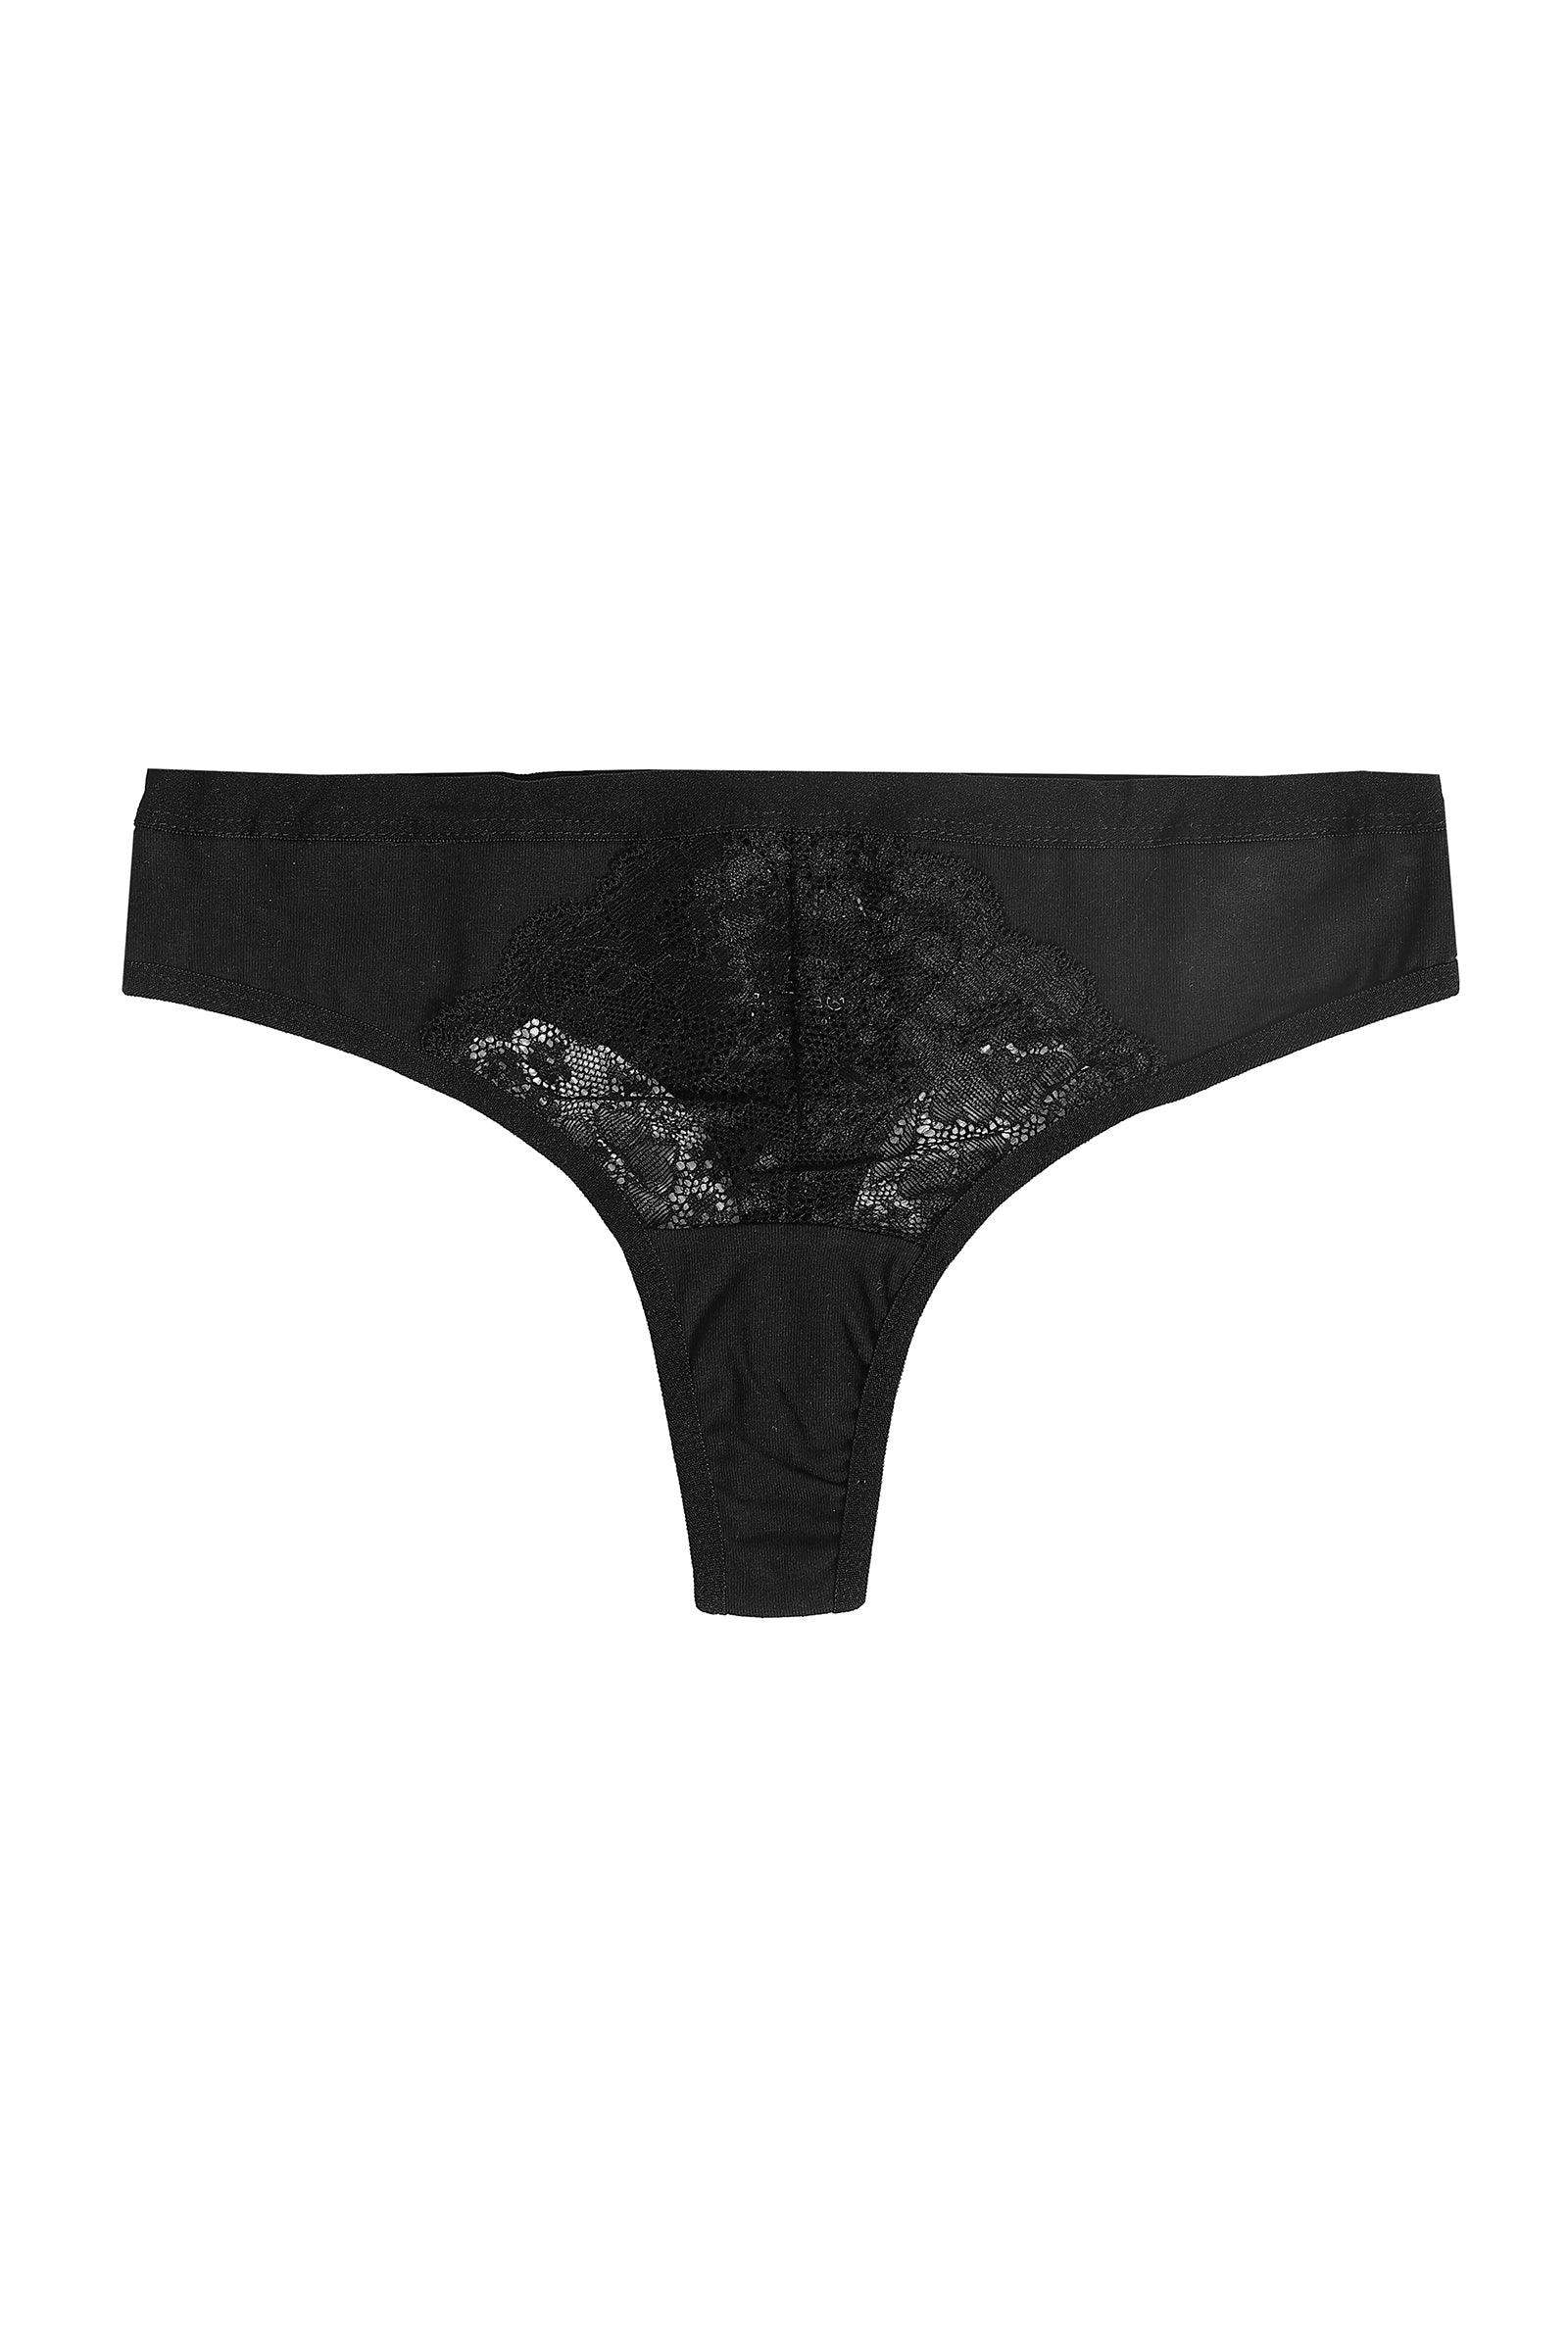 Cotton Thong Panty with Lace - Carina - كارينا